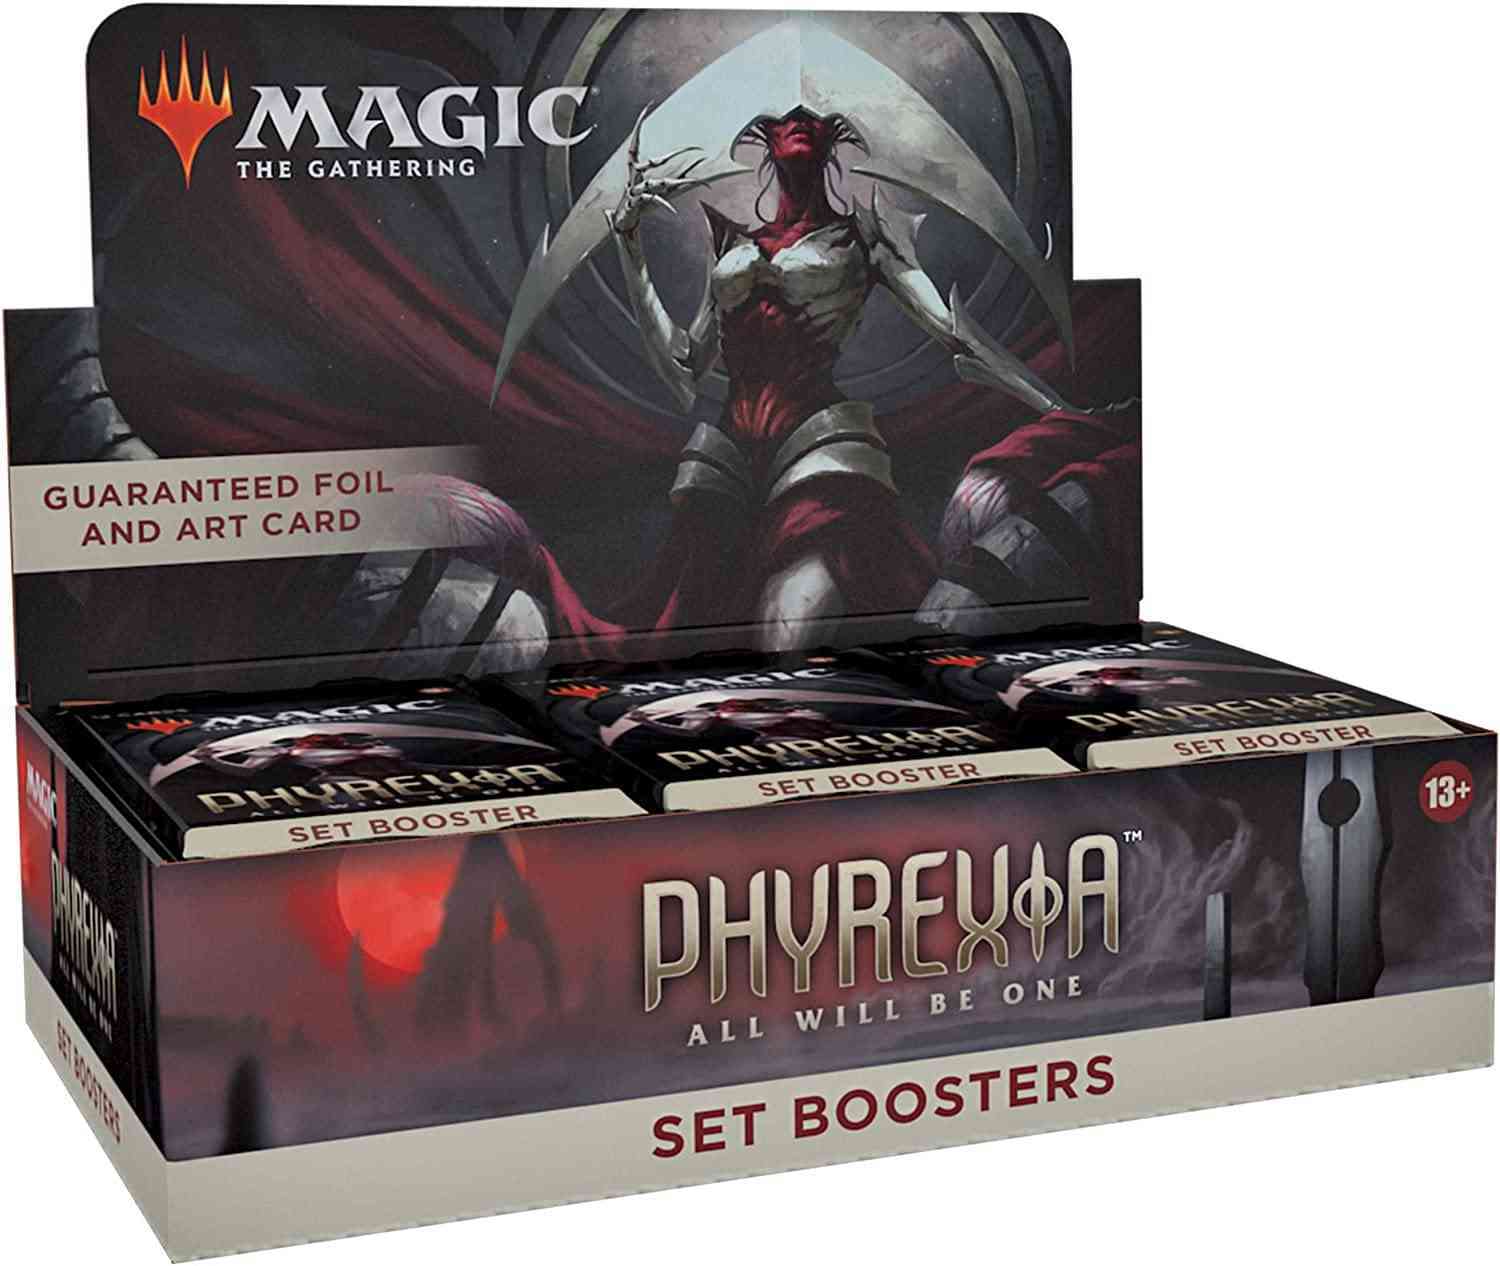 Magic: The Gathering Phyrexia: All Will Be One Set Booster Box